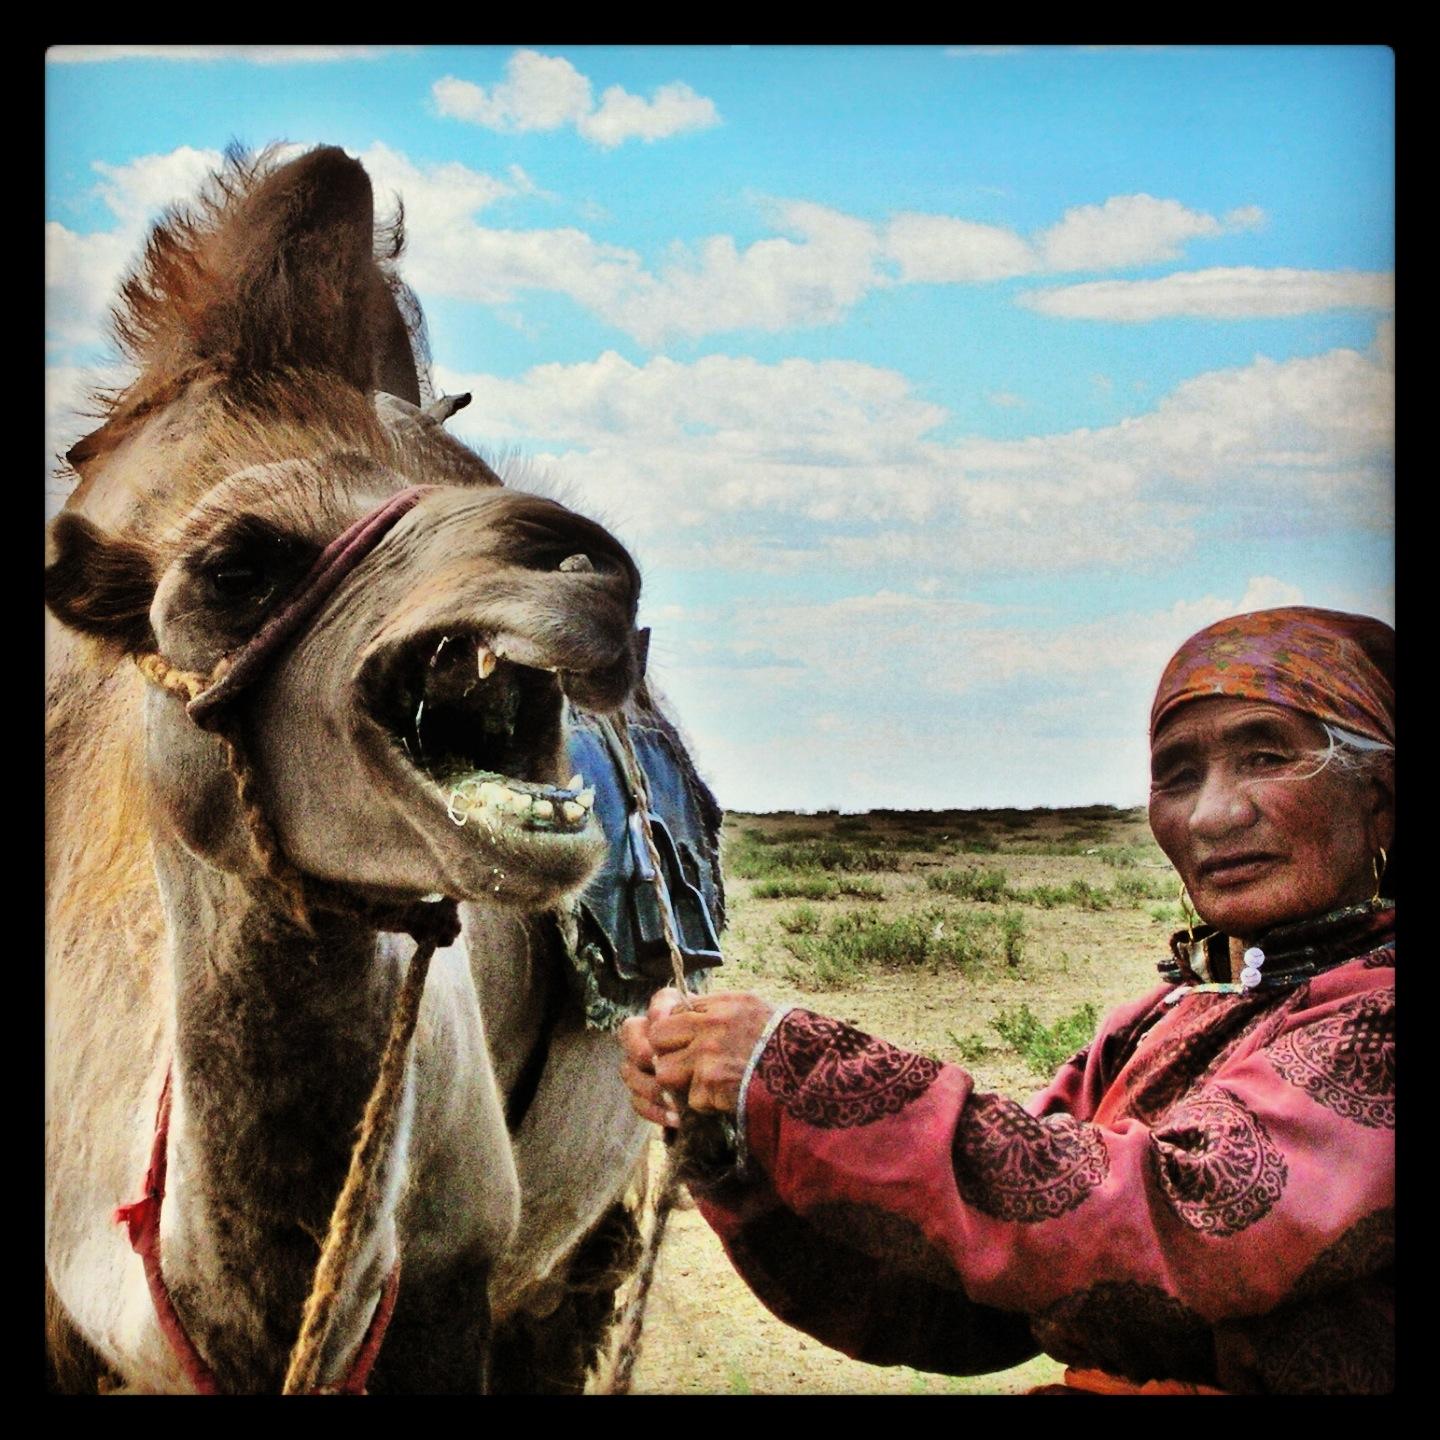 camel-and-nomadic-woman-in-mongolia